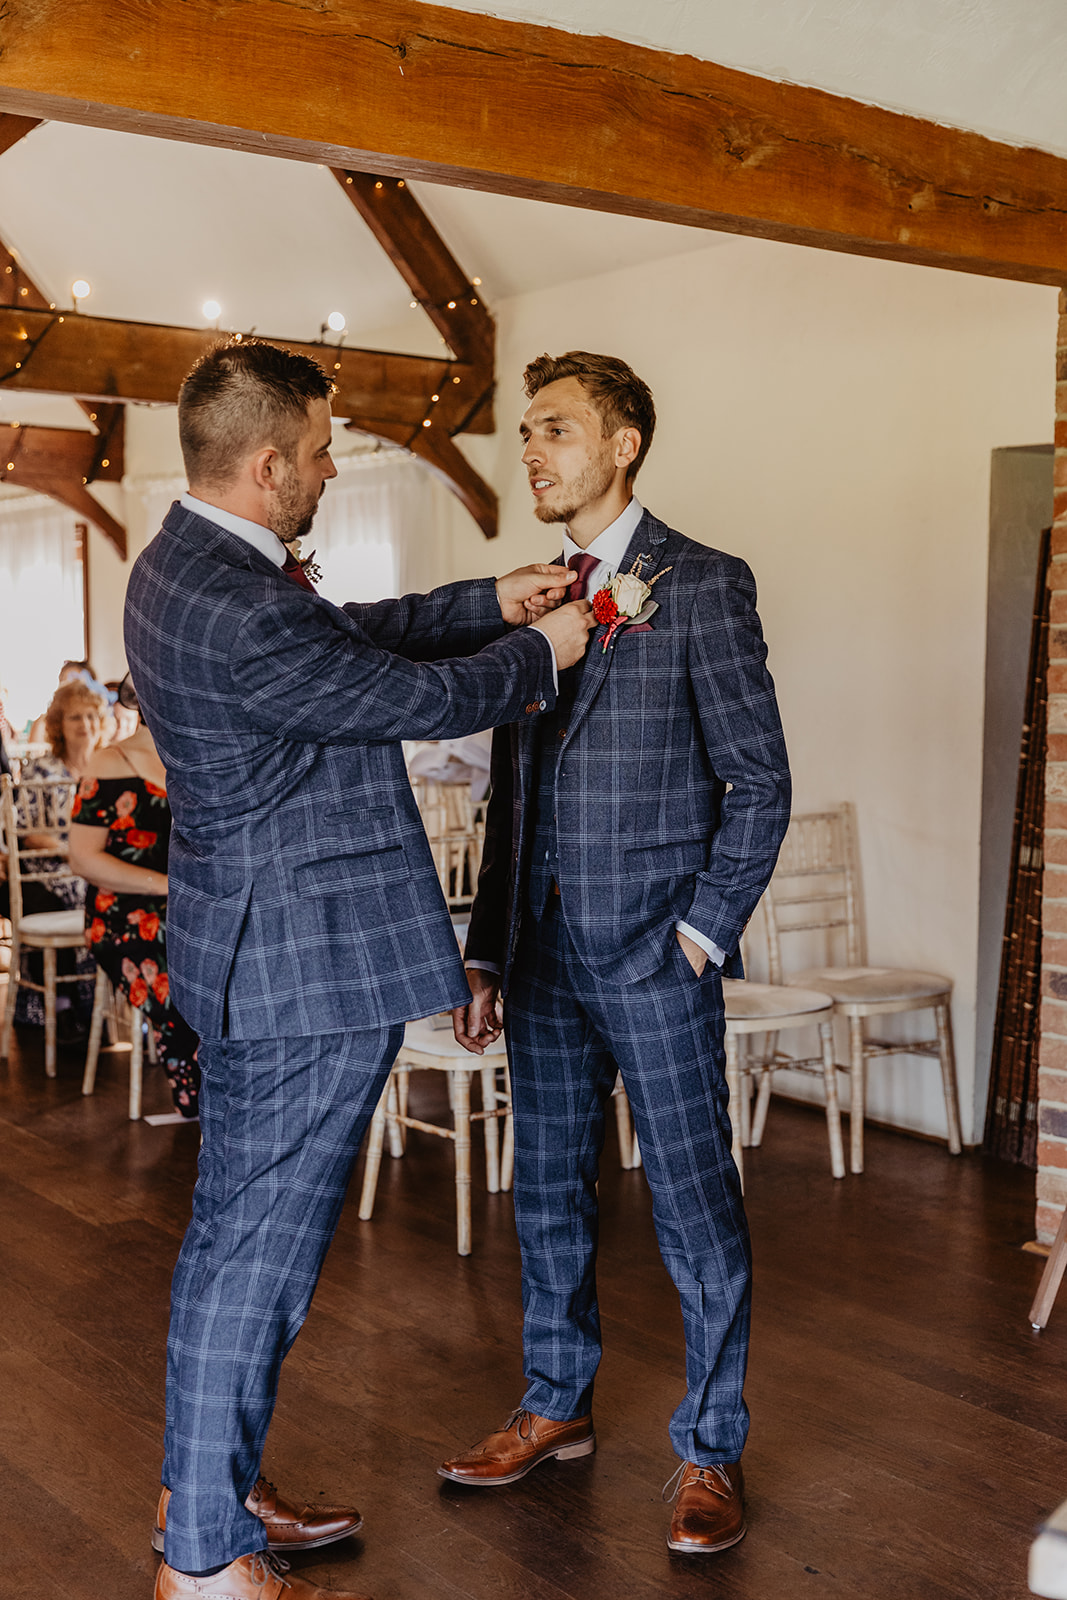 Best man and groom at a wedding at Long Furlong Barn, Sussex. By OliveJoy Photography.